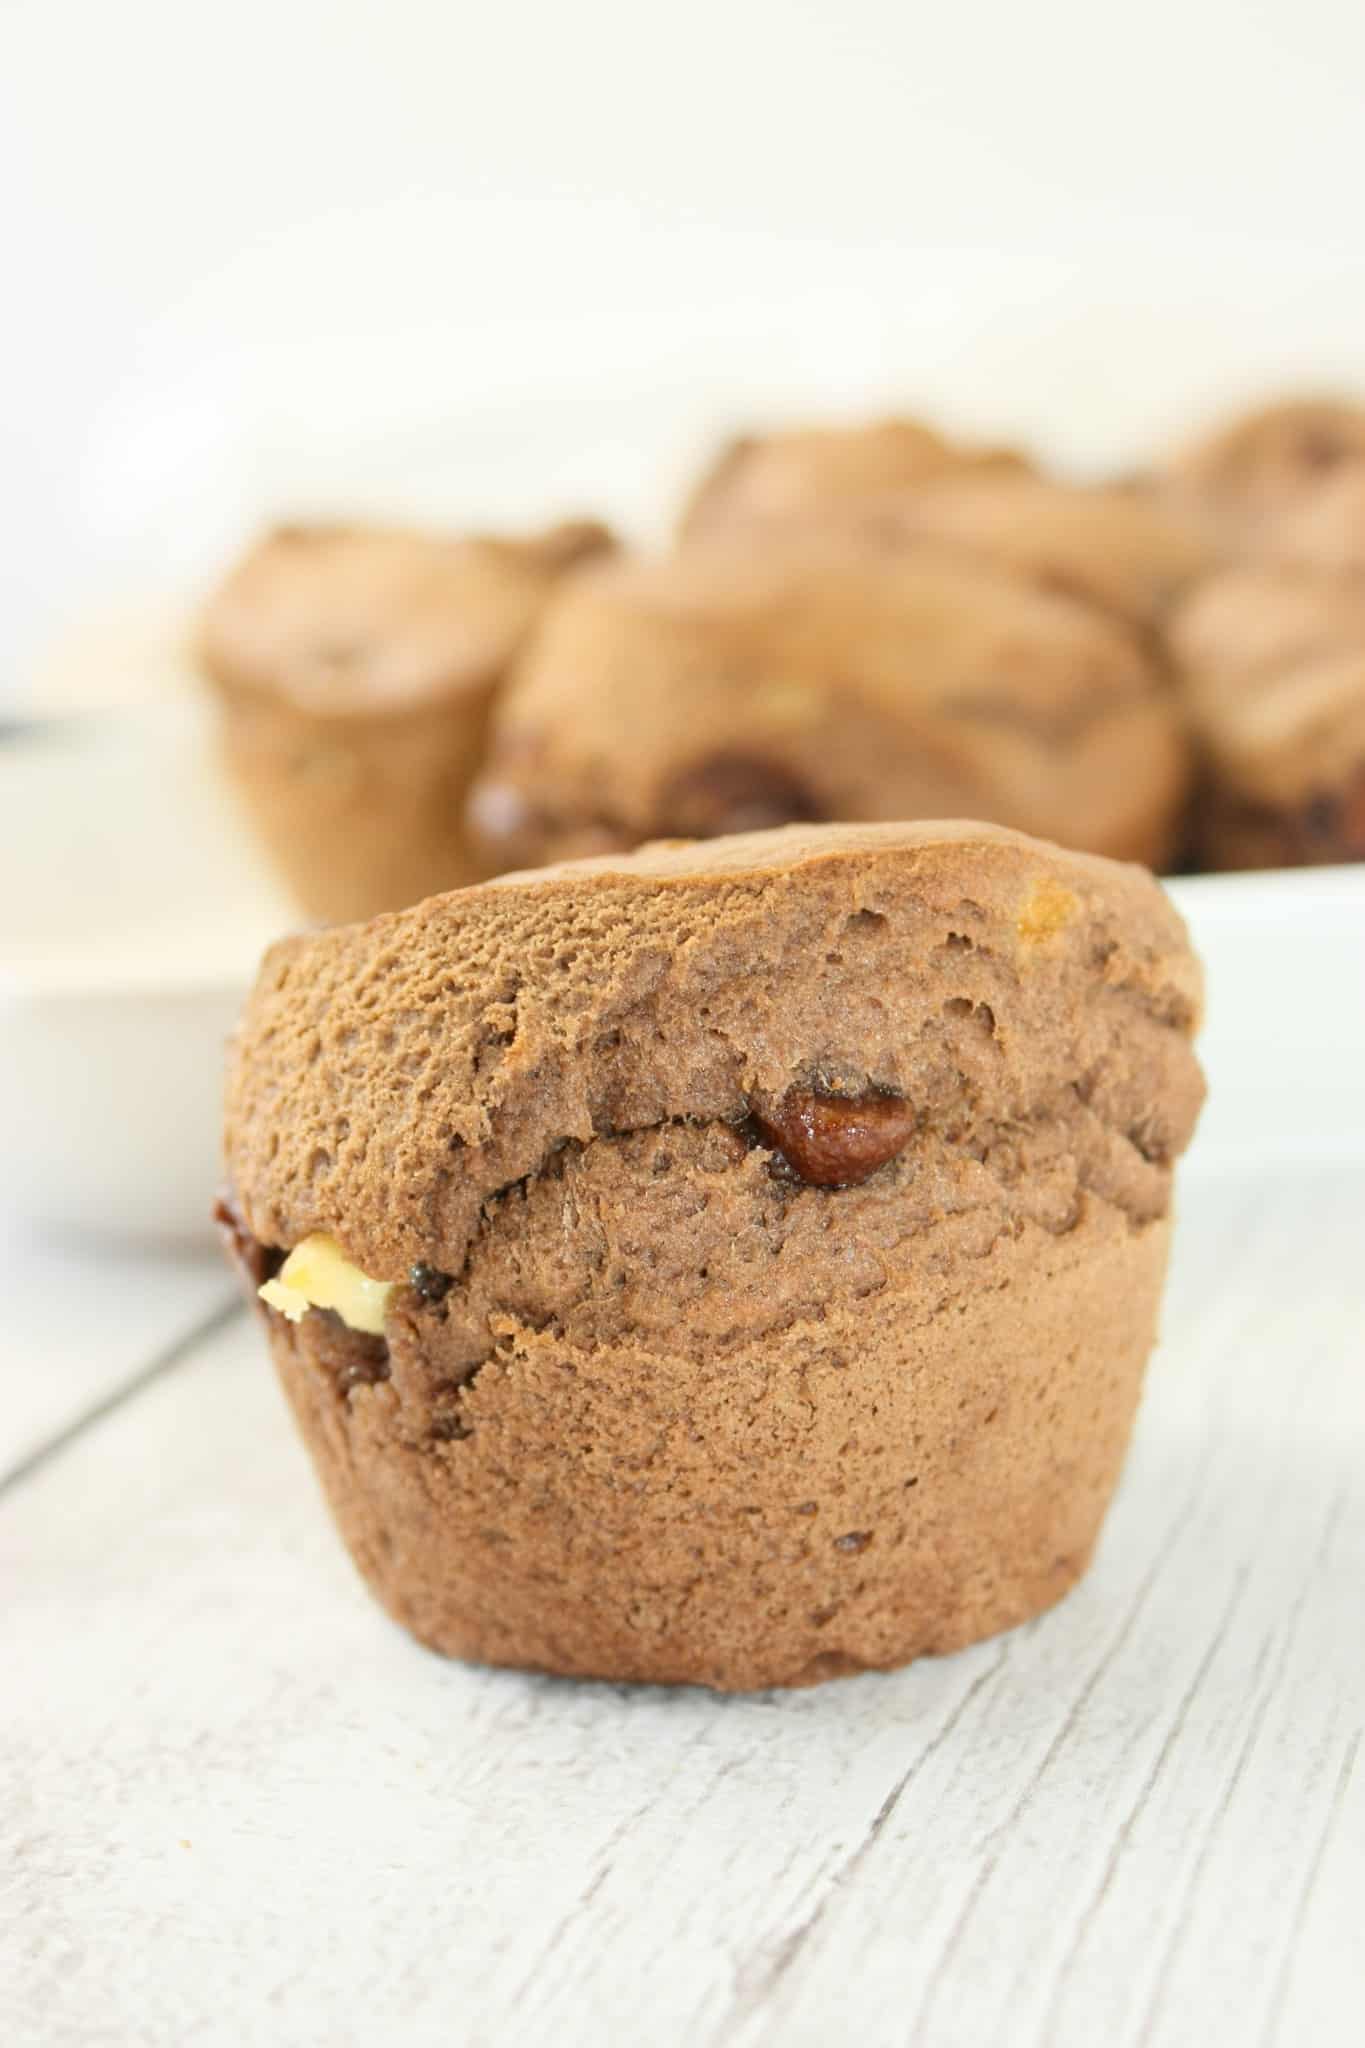 Air Fryer Chocolate Banana Muffins are a moist, tasty snack or even a dessert.  These gluten free muffins are great on their own or warm them up before drizzling with some chocolate and caramel sauce!